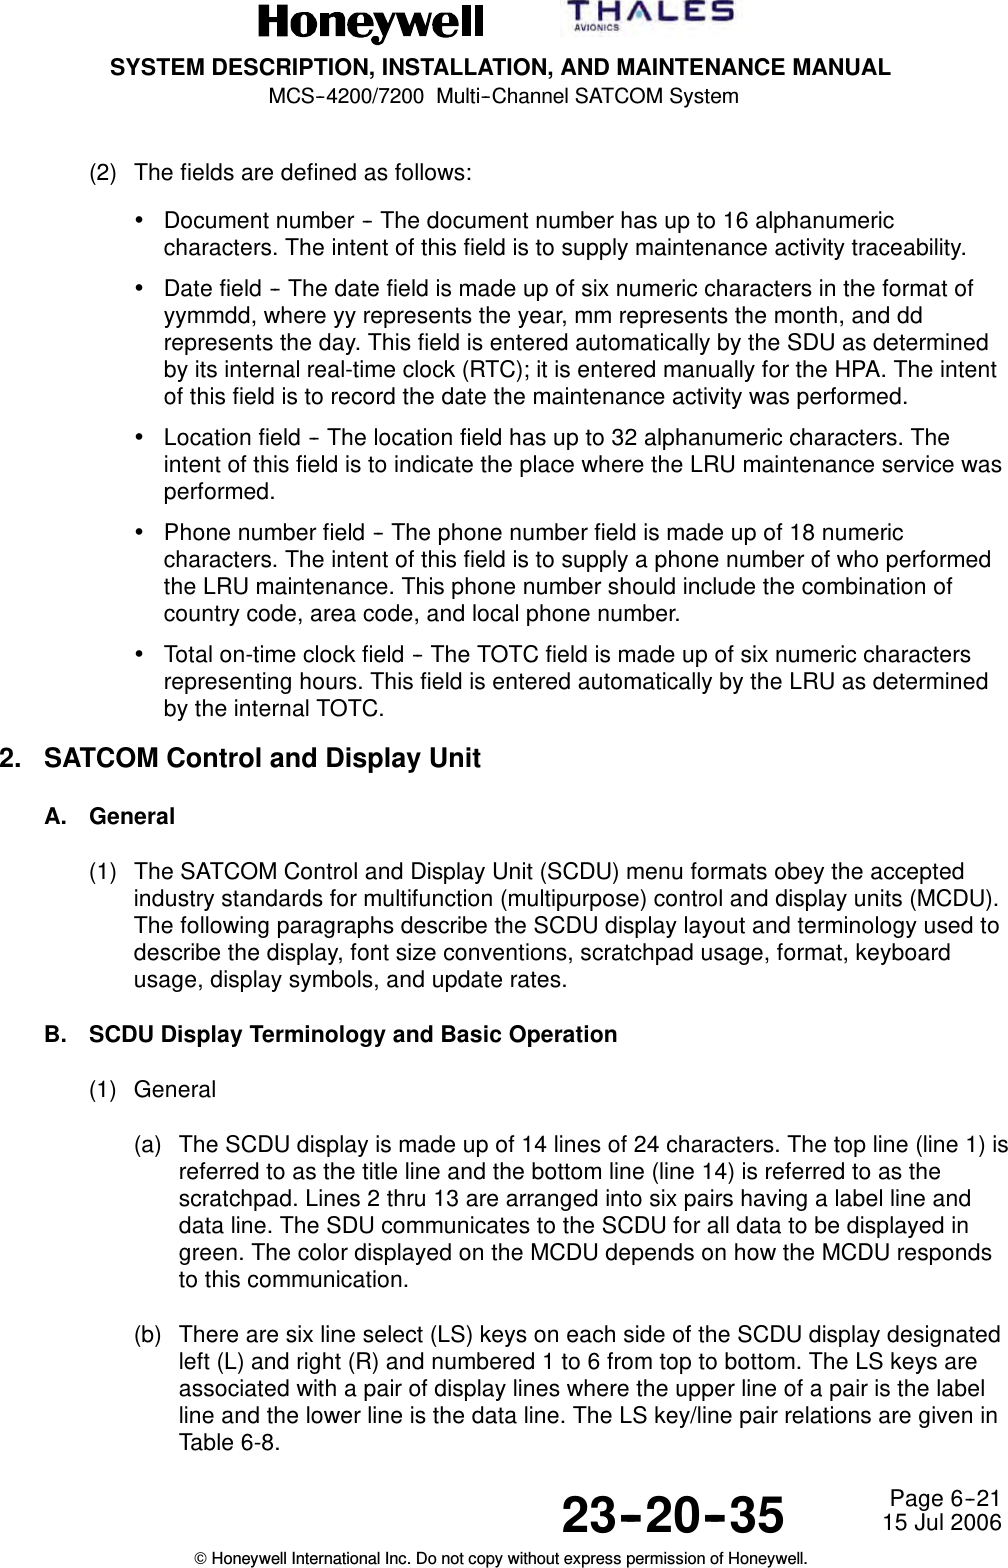 SYSTEM DESCRIPTION, INSTALLATION, AND MAINTENANCE MANUALMCS--4200/7200 Multi--Channel SATCOM System23--20--35 15 Jul 2006Honeywell International Inc. Do not copy without express permission of Honeywell.Page 6--21(2) The fields are defined as follows:•Document number -- The document number has up to 16 alphanumericcharacters. The intent of this field is to supply maintenance activity traceability.•Date field -- The date field is made up of six numeric characters in the format ofyymmdd, where yy represents the year, mm represents the month, and ddrepresents the day. This field is entered automatically by the SDU as determinedby its internal real-time clock (RTC); it is entered manually for the HPA. The intentof this field is to record the date the maintenance activity was performed.•Location field -- The location field has up to 32 alphanumeric characters. Theintent of this field is to indicate the place where the LRU maintenance service wasperformed.•Phone number field -- The phone number field is made up of 18 numericcharacters. The intent of this field is to supply a phone number of who performedthe LRU maintenance. This phone number should include the combination ofcountry code, area code, and local phone number.•Total on-time clock field -- The TOTC field is made up of six numeric charactersrepresenting hours. This field is entered automatically by the LRU as determinedby the internal TOTC.2. SATCOM Control and Display UnitA. General(1) The SATCOM Control and Display Unit (SCDU) menu formats obey the acceptedindustry standards for multifunction (multipurpose) control and display units (MCDU).The following paragraphs describe the SCDU display layout and terminology used todescribe the display, font size conventions, scratchpad usage, format, keyboardusage, display symbols, and update rates.B. SCDU Display Terminology and Basic Operation(1) General(a) The SCDU display is made up of 14 lines of 24 characters. The top line (line 1) isreferredtoasthetitlelineandthebottomline(line14)isreferredtoasthescratchpad. Lines 2 thru 13 are arranged into six pairs having a label line anddata line. The SDU communicates to the SCDU for all data to be displayed ingreen. The color displayed on the MCDU depends on how the MCDU respondsto this communication.(b) There are six line select (LS) keys on each side of the SCDU display designatedleft (L) and right (R) and numbered 1 to 6 from top to bottom. The LS keys areassociated with a pair of display lines where the upper line of a pair is the labelline and the lower line is the data line. The LS key/line pair relations are given inTable 6-8.